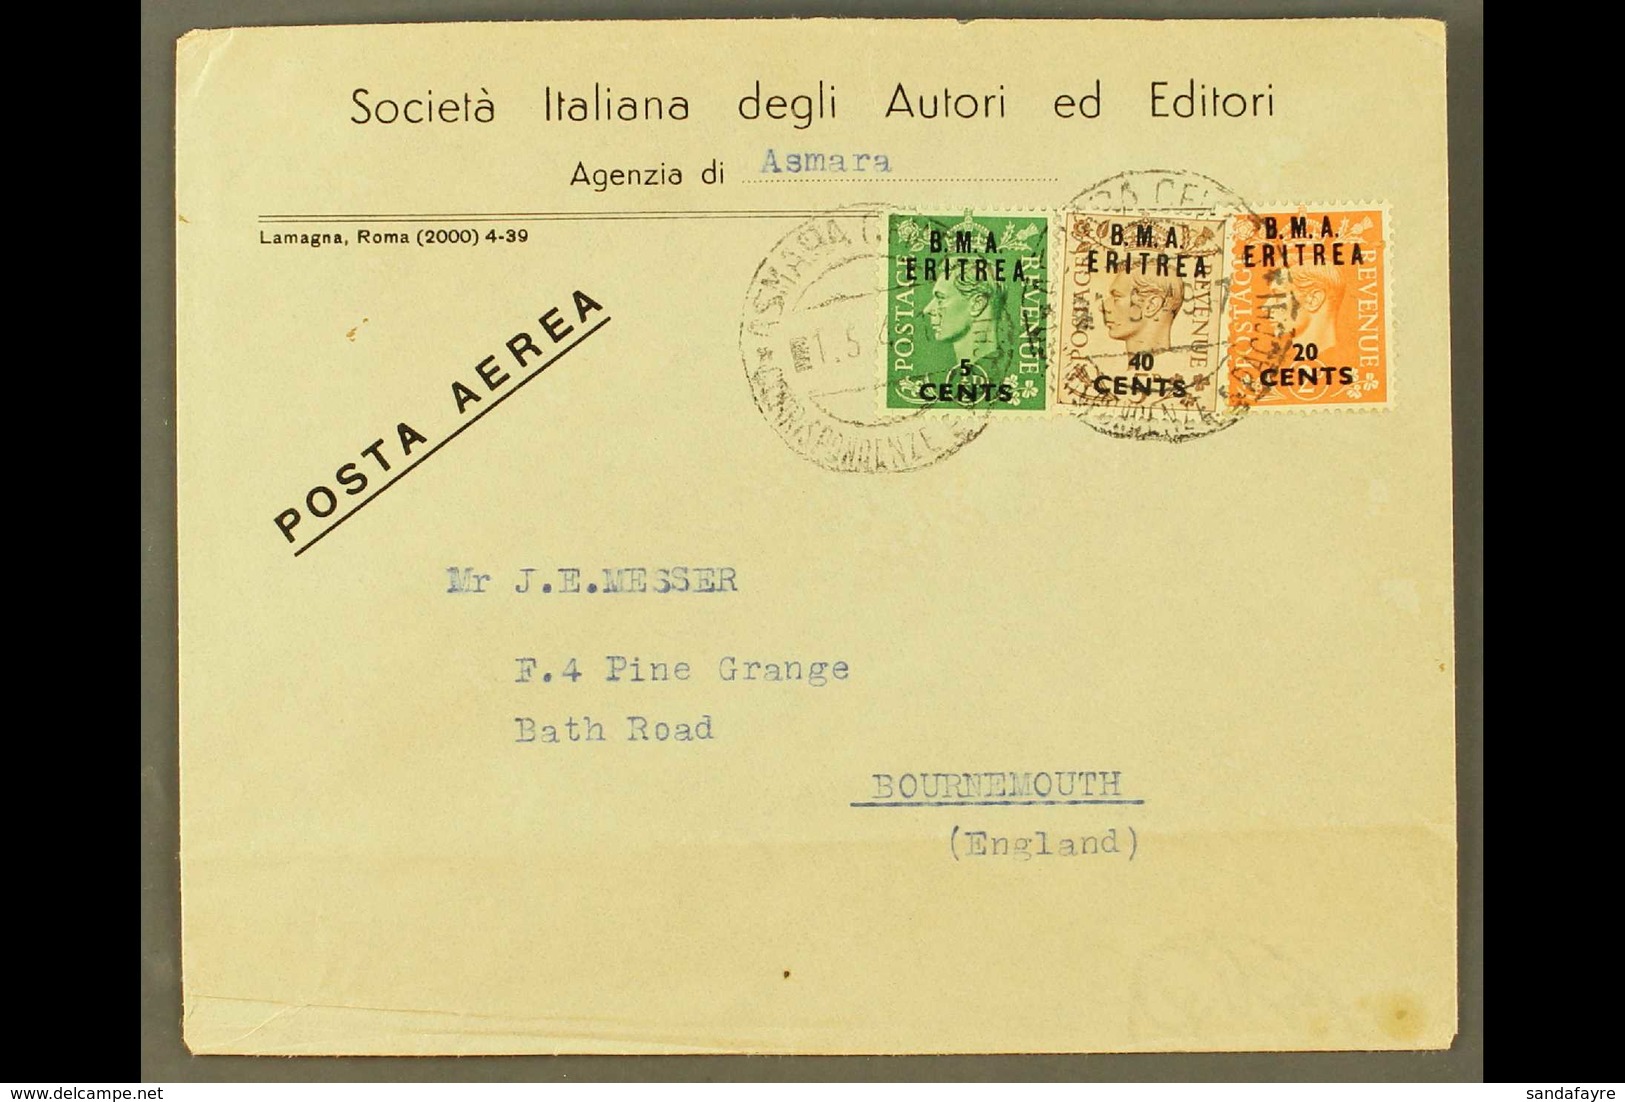 ERITREA 1949 (May) Printed Commercial Envelope To England, Bearing B.M.A. 5c On ½d, 20c On 2d And 40c On 5d, Tied Asmara - Italienisch Ost-Afrika